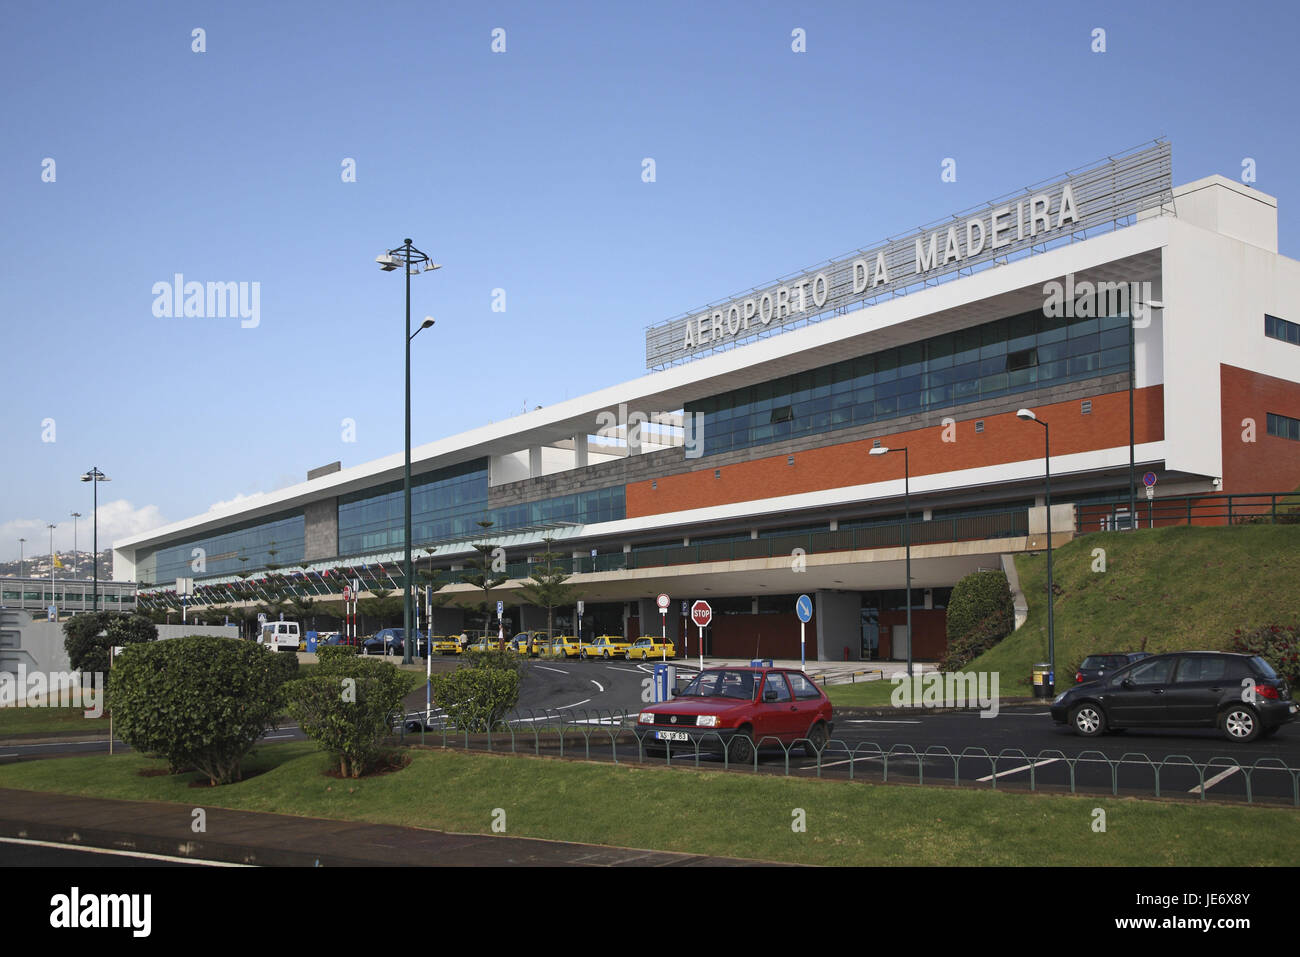 Portugal, Madeira, Funchal, airport, Stock Photo